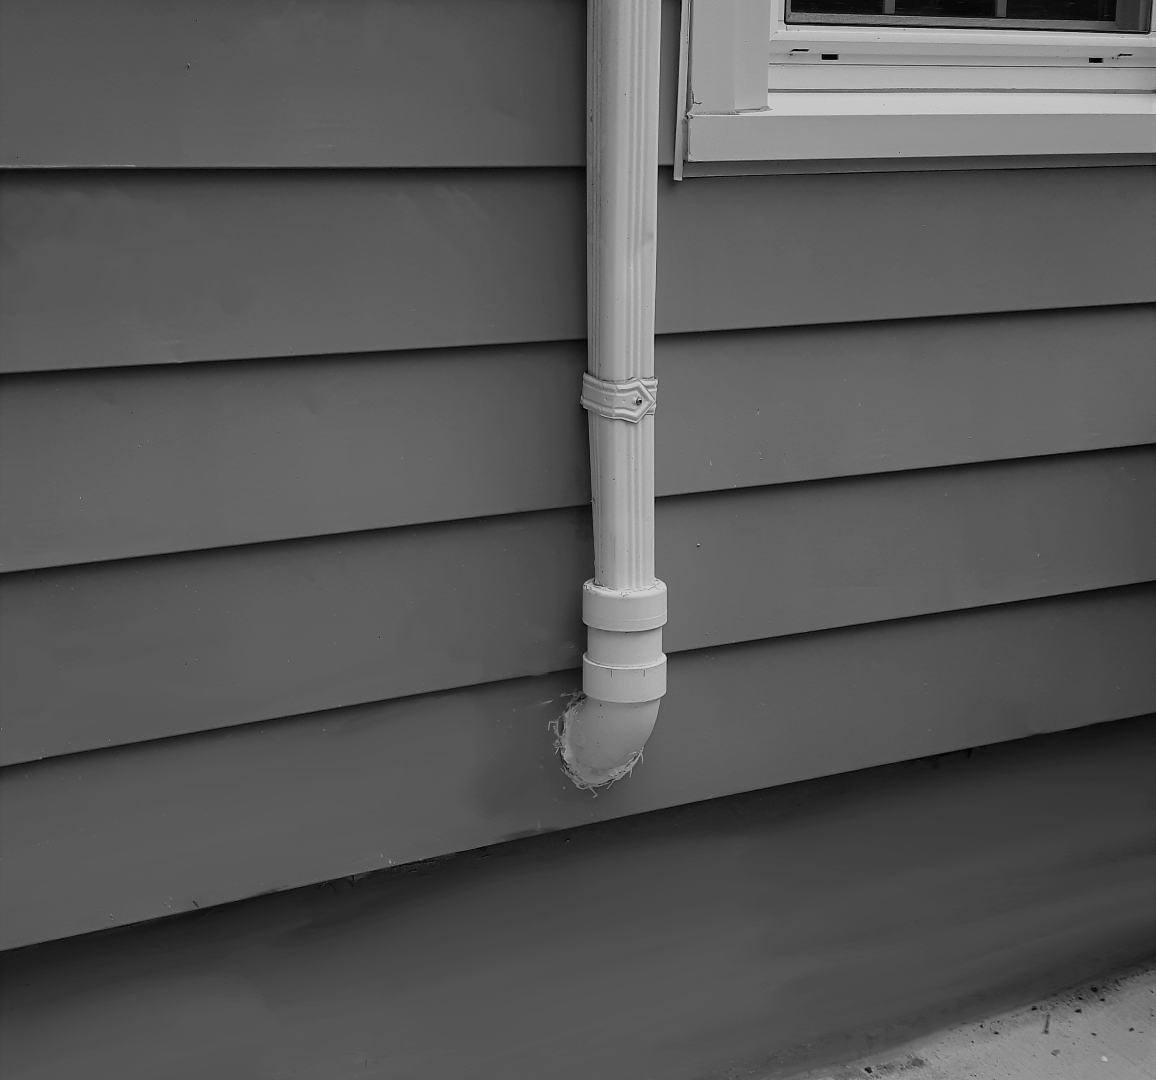 Downspout into house